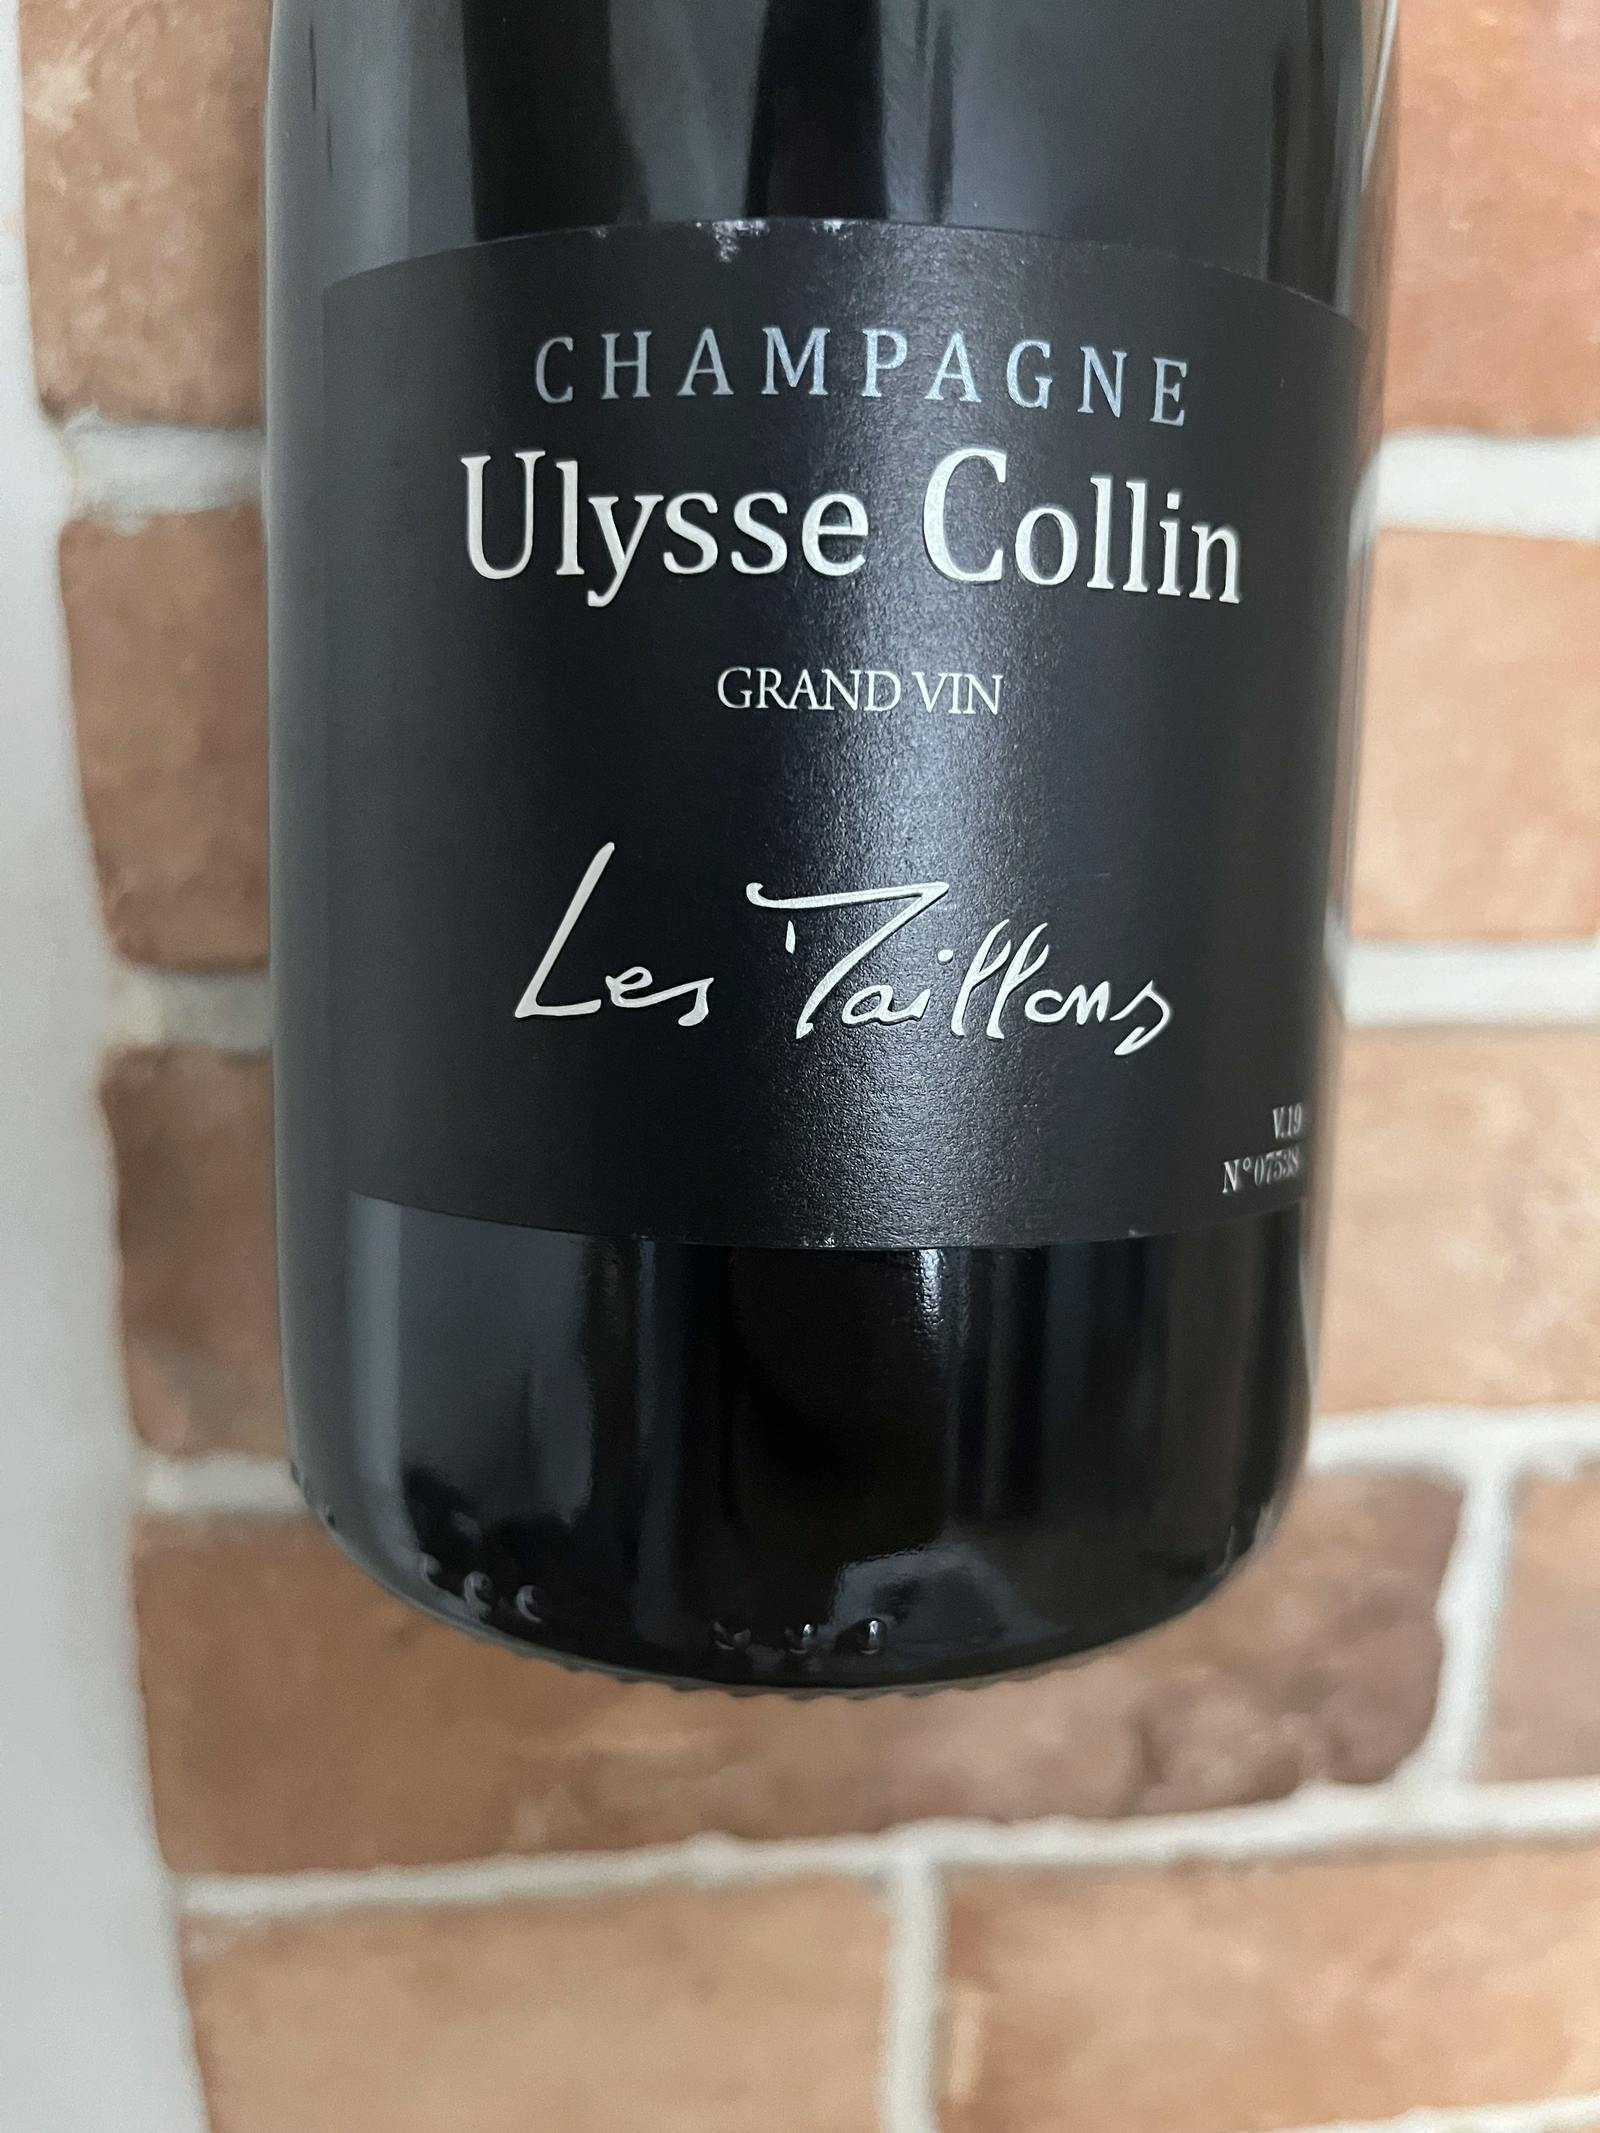 Ulysse Collin Les Maillons (2019) NV